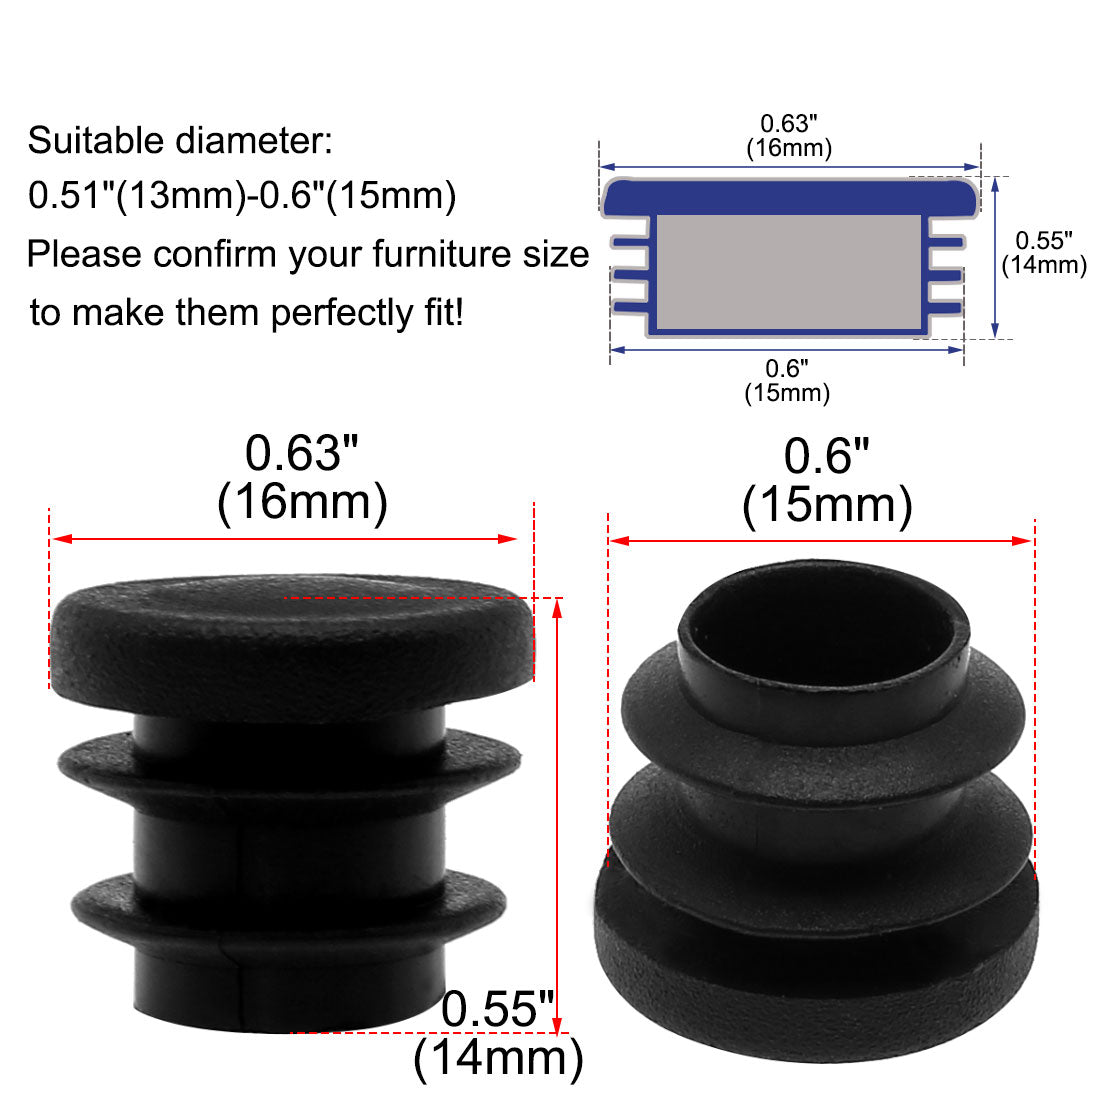 uxcell Uxcell 5/8" 16mm OD Plastic Round Tube Ribbed Inserts End Cover Caps 28pcs, 0.51"-0.6" Inner Dia, Floor Furniture Chair Desk Protector